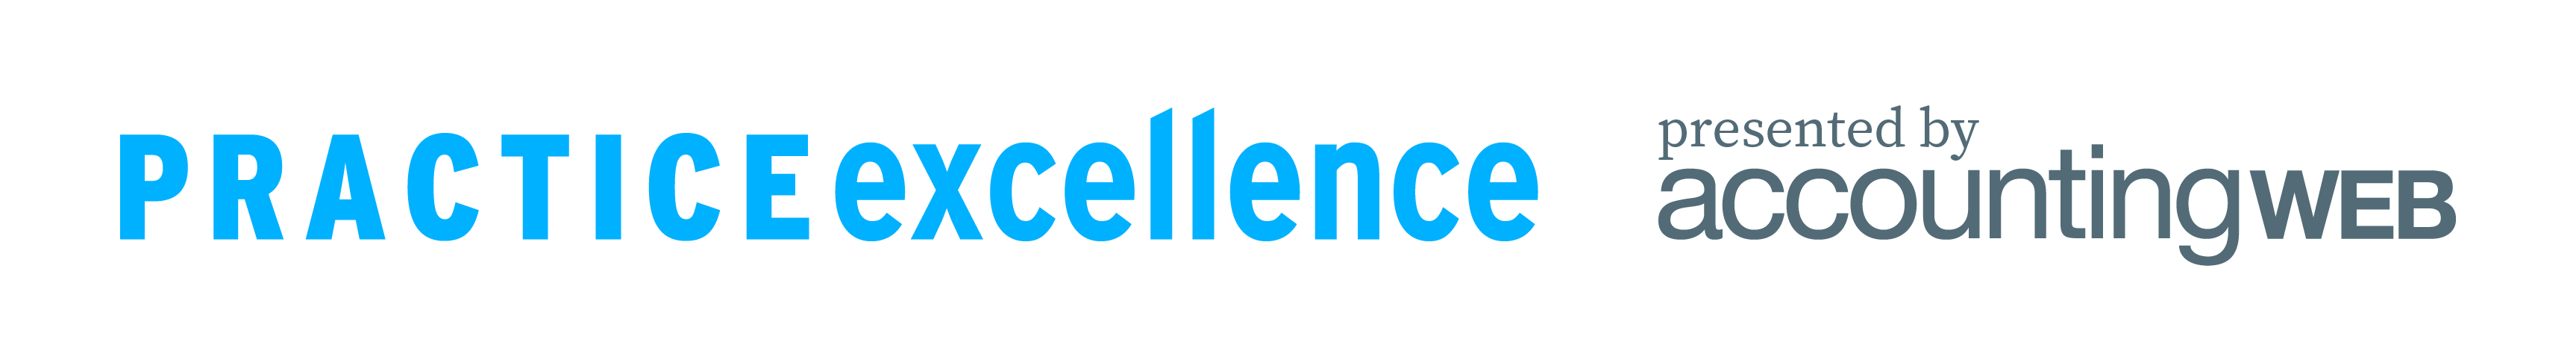 Practice_Excellence_Logo_withAWEB-1